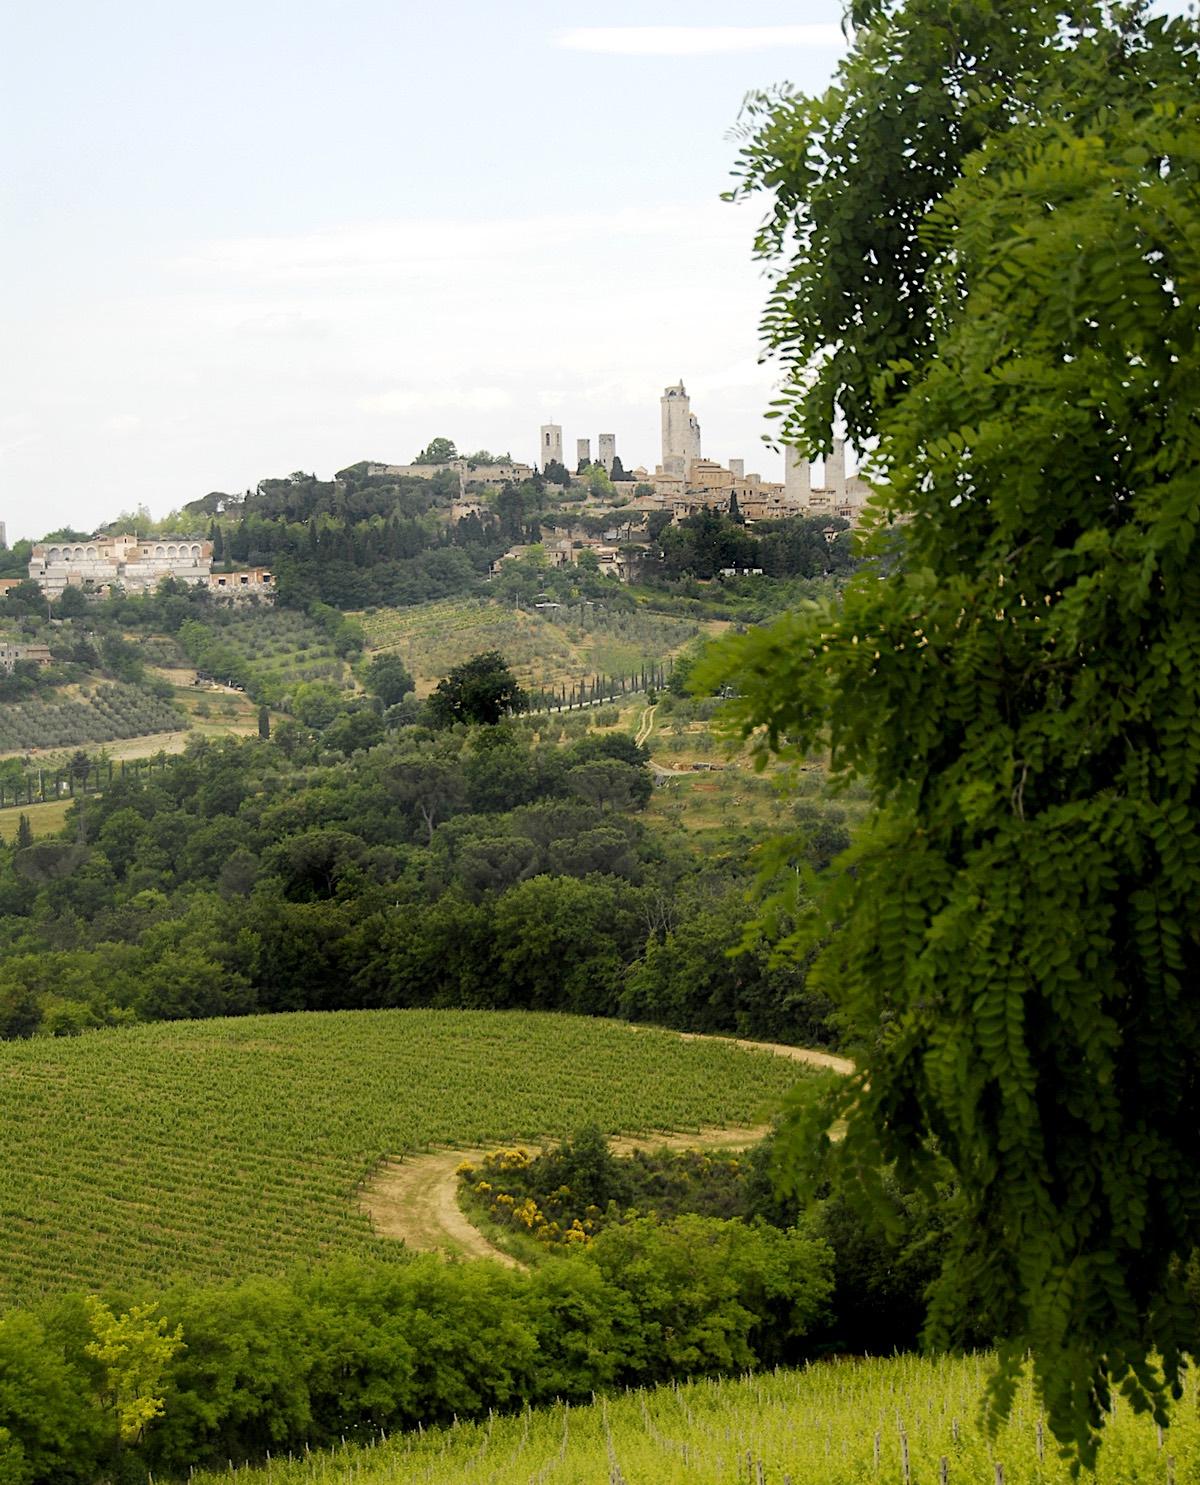 The earliest recorded mentions of Vernaccia di San Gimignano date back to the 13th century – © Consorzio Del Vino Vernaccia Di San Gimignano